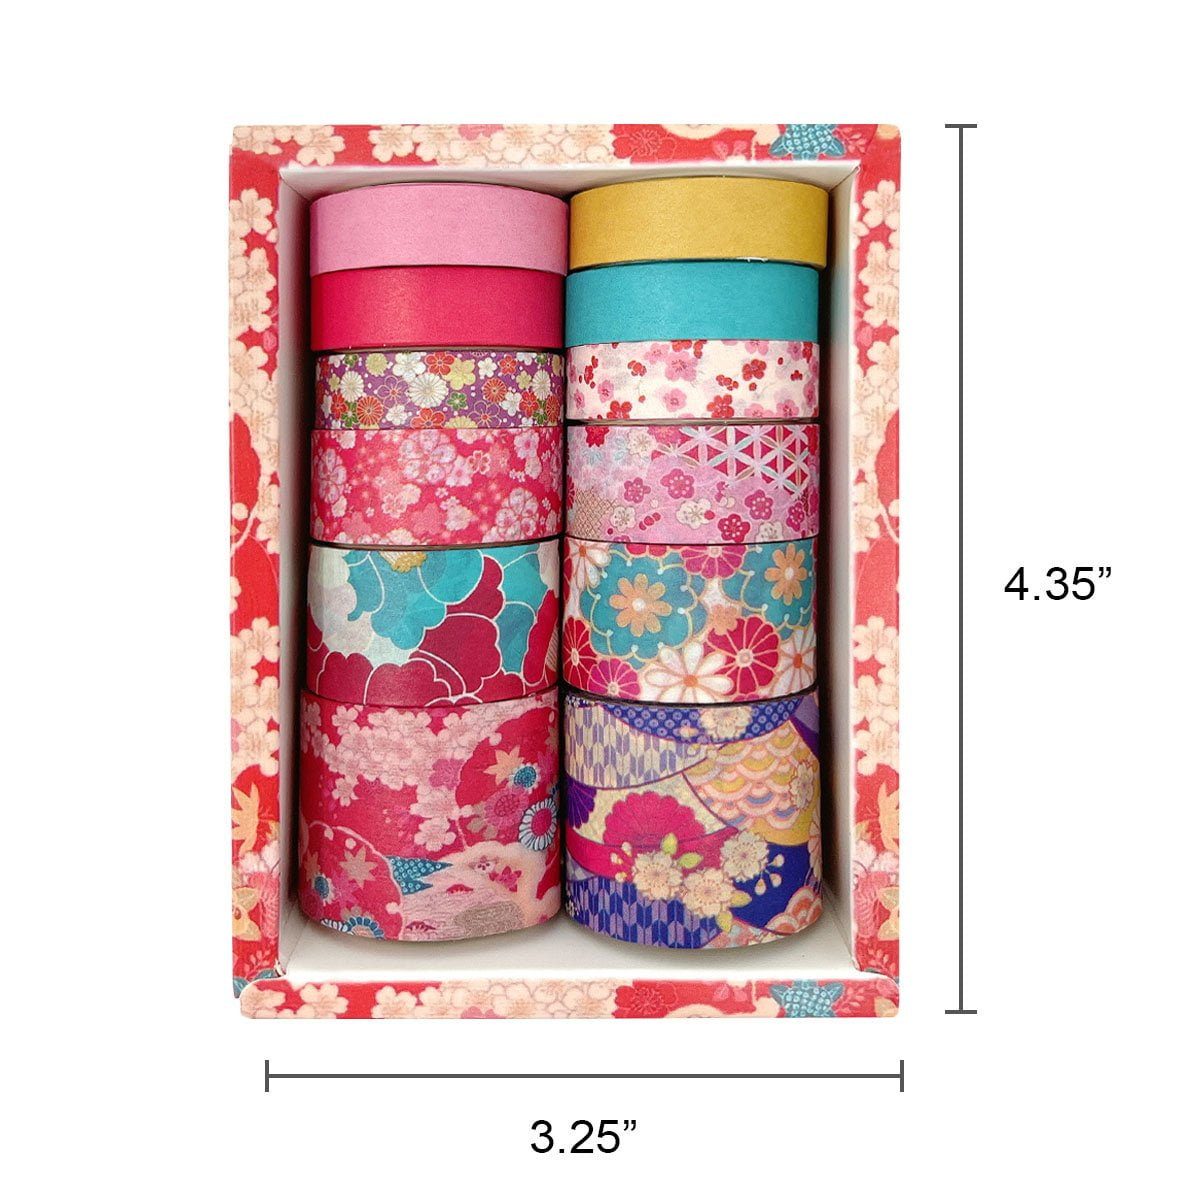 Wrapables 3 Rolls Decorative Washi Tape Stickers for Scrapbooking, Stationery, Diary, Card Making (300 Pcs) Vintage Scenery